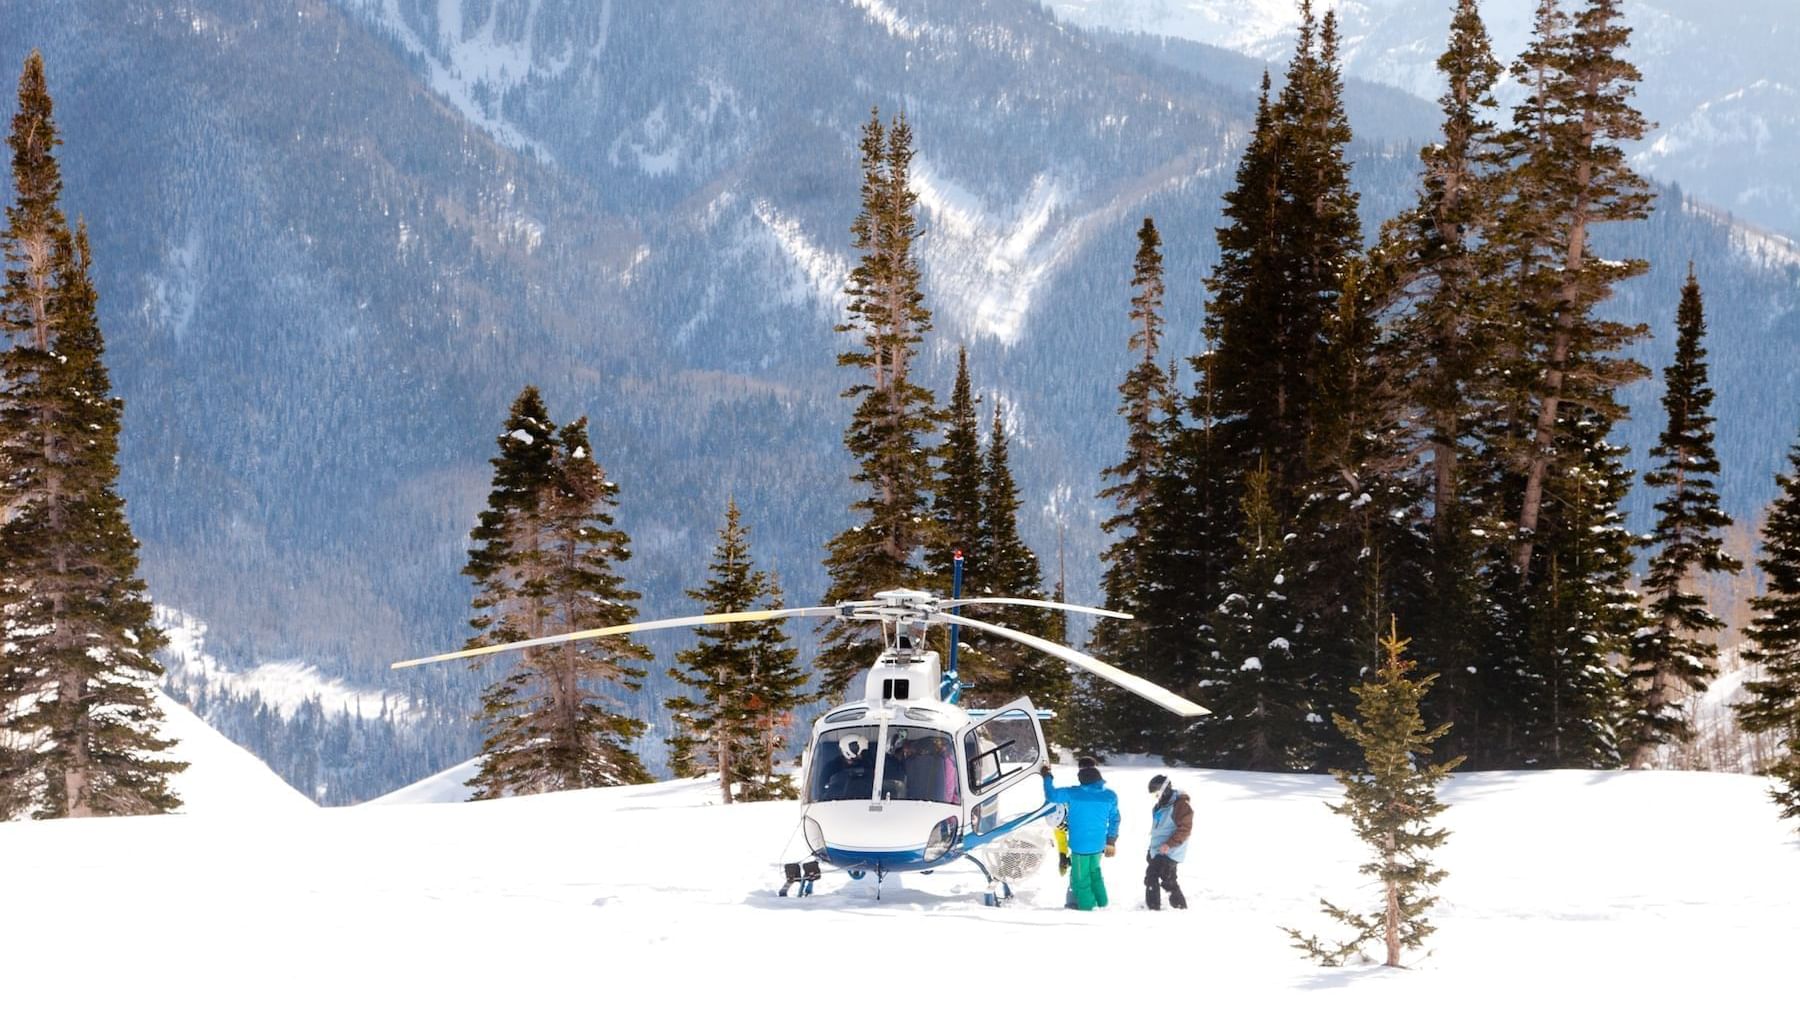 Helicopter on snowy mountain